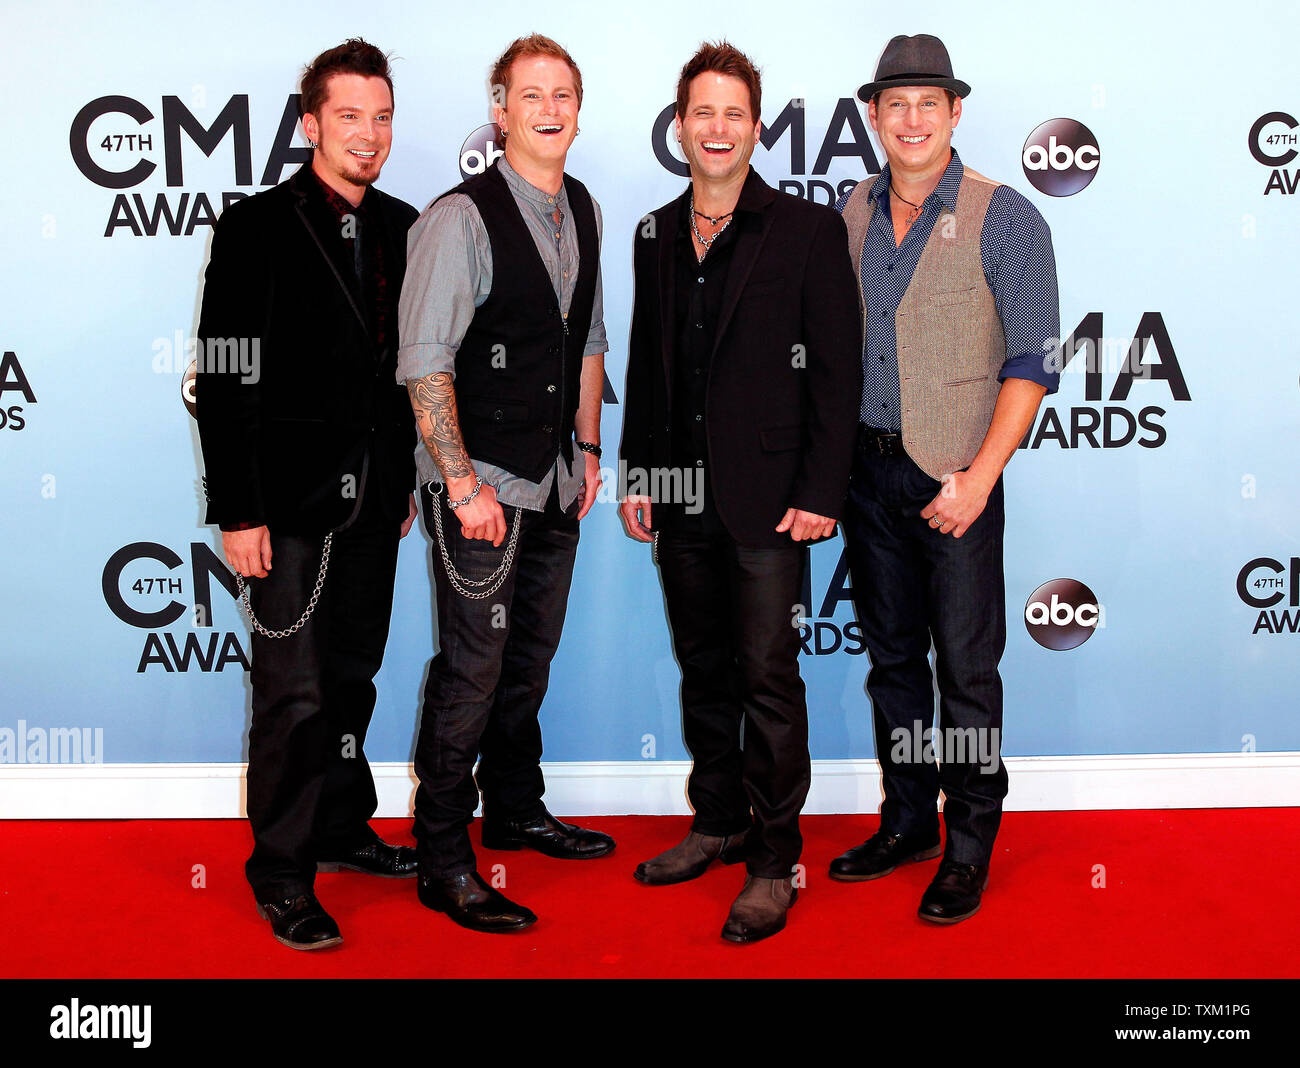 Parmalee arrives on the red carpet at the 47th Annual Country Music Awards at the Bridgestone Arena in Nashville on November 6, 2013. UPI/Terry Wyatt Stock Photo